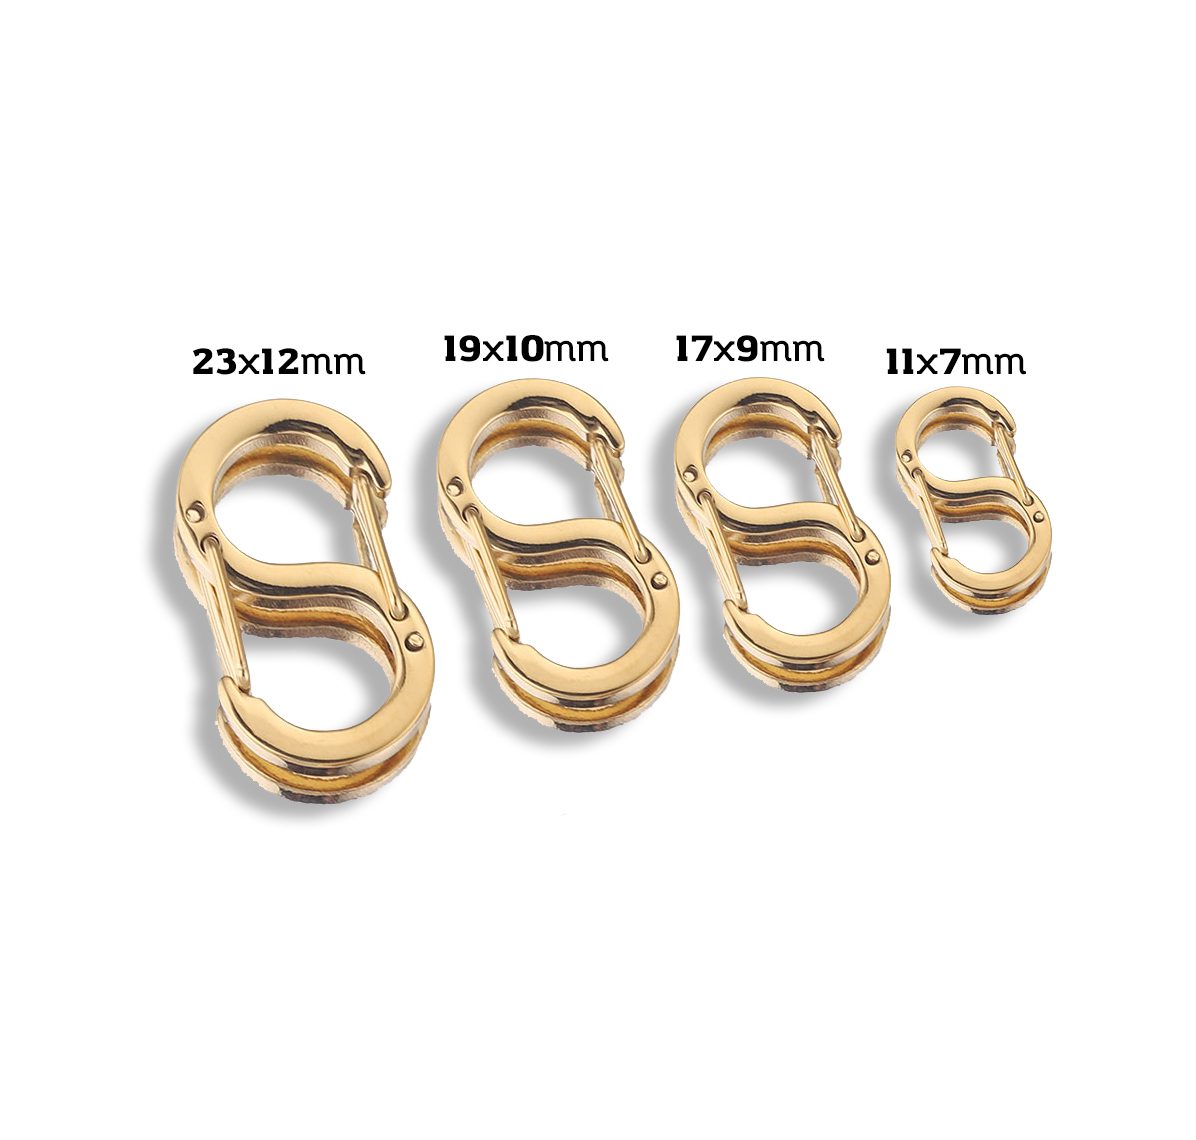 14k Gold Designer Double Side Openable S Lock Jewelry Finding